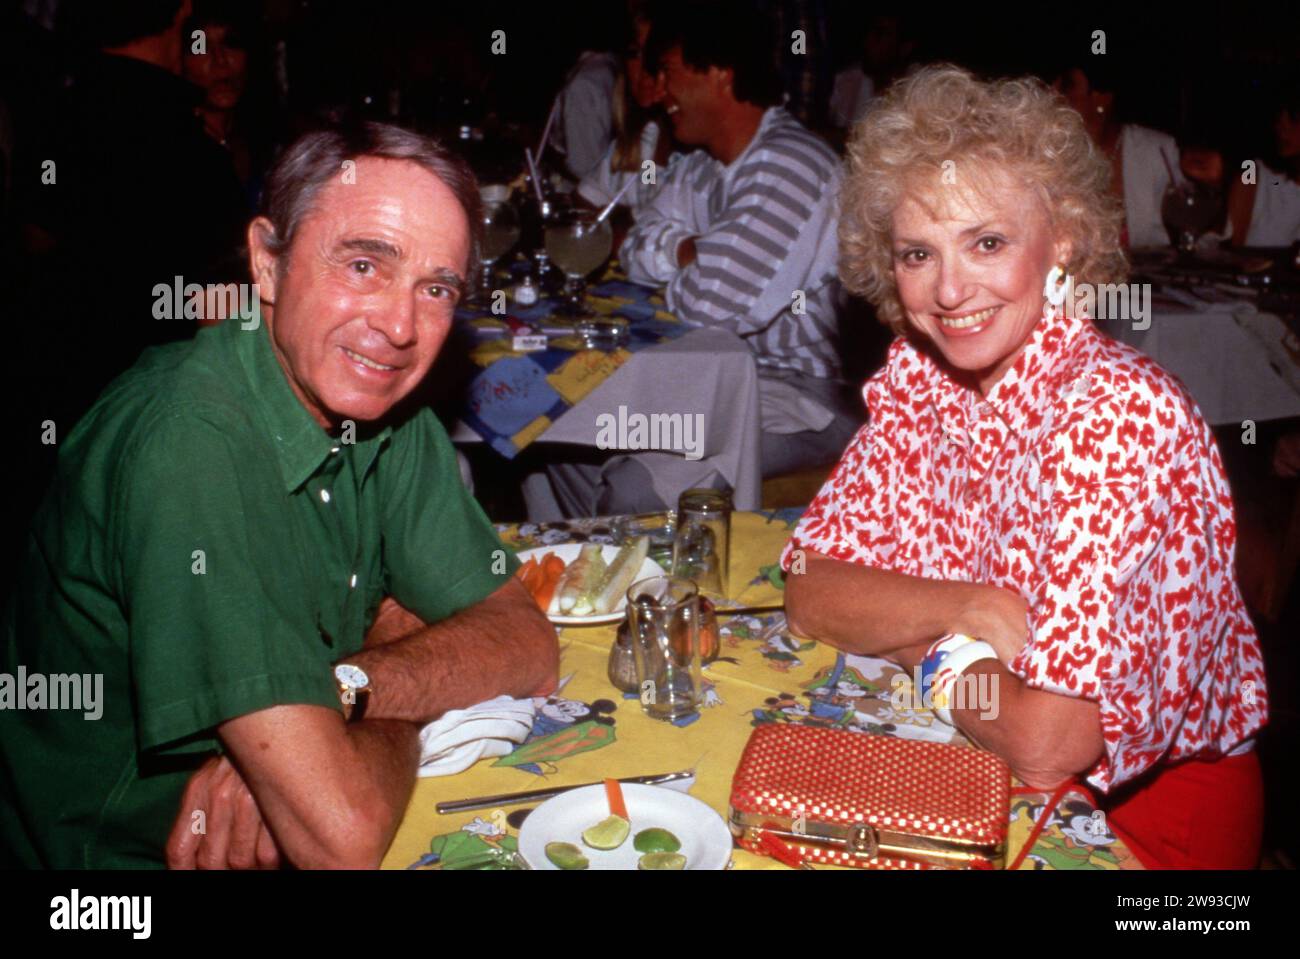 **FILE PHOTO** Selma Archerd Has Passed Away. Army Archerd and Selma Archerd Circa 1980's Credit: Ralph Dominguez/MediaPunch Credit: MediaPunch Inc/Alamy Live News Stock Photo